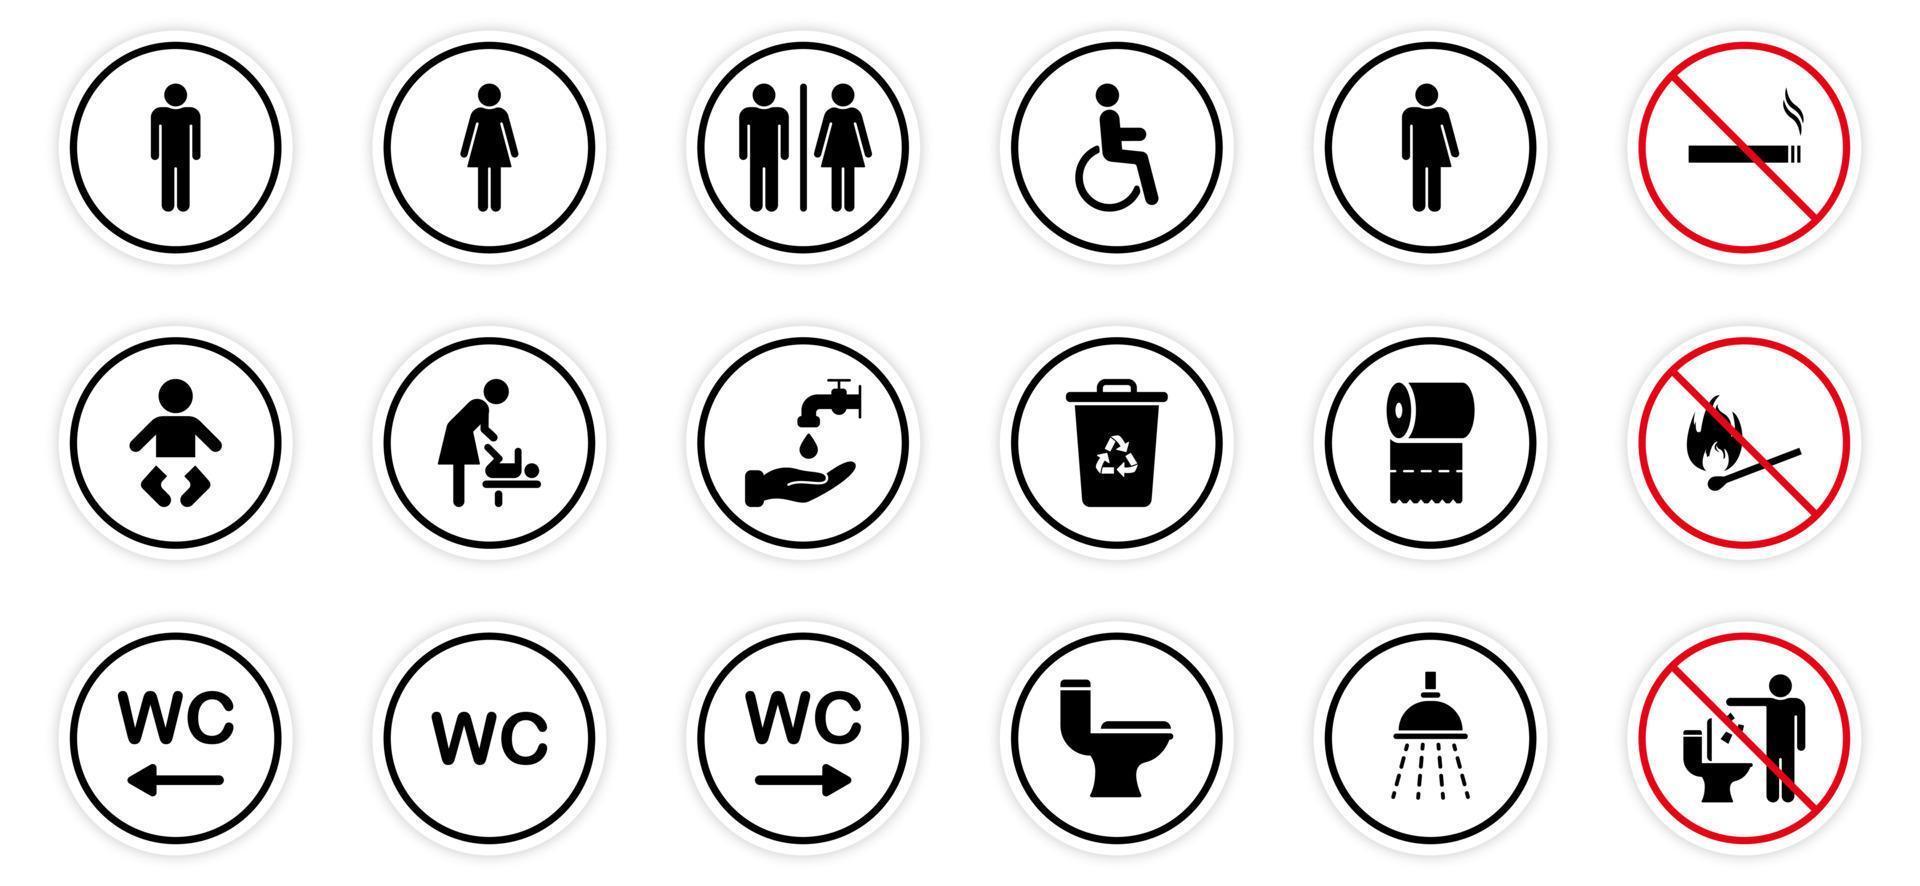 Toilet Room Silhouette Icon. Set of WC Sign. Bathroom, Restroom Pictogram. Public Washroom for Disabled, Male, Female, Transgender. Mother and Baby Room. No smoking Sign. Vector Illustration.